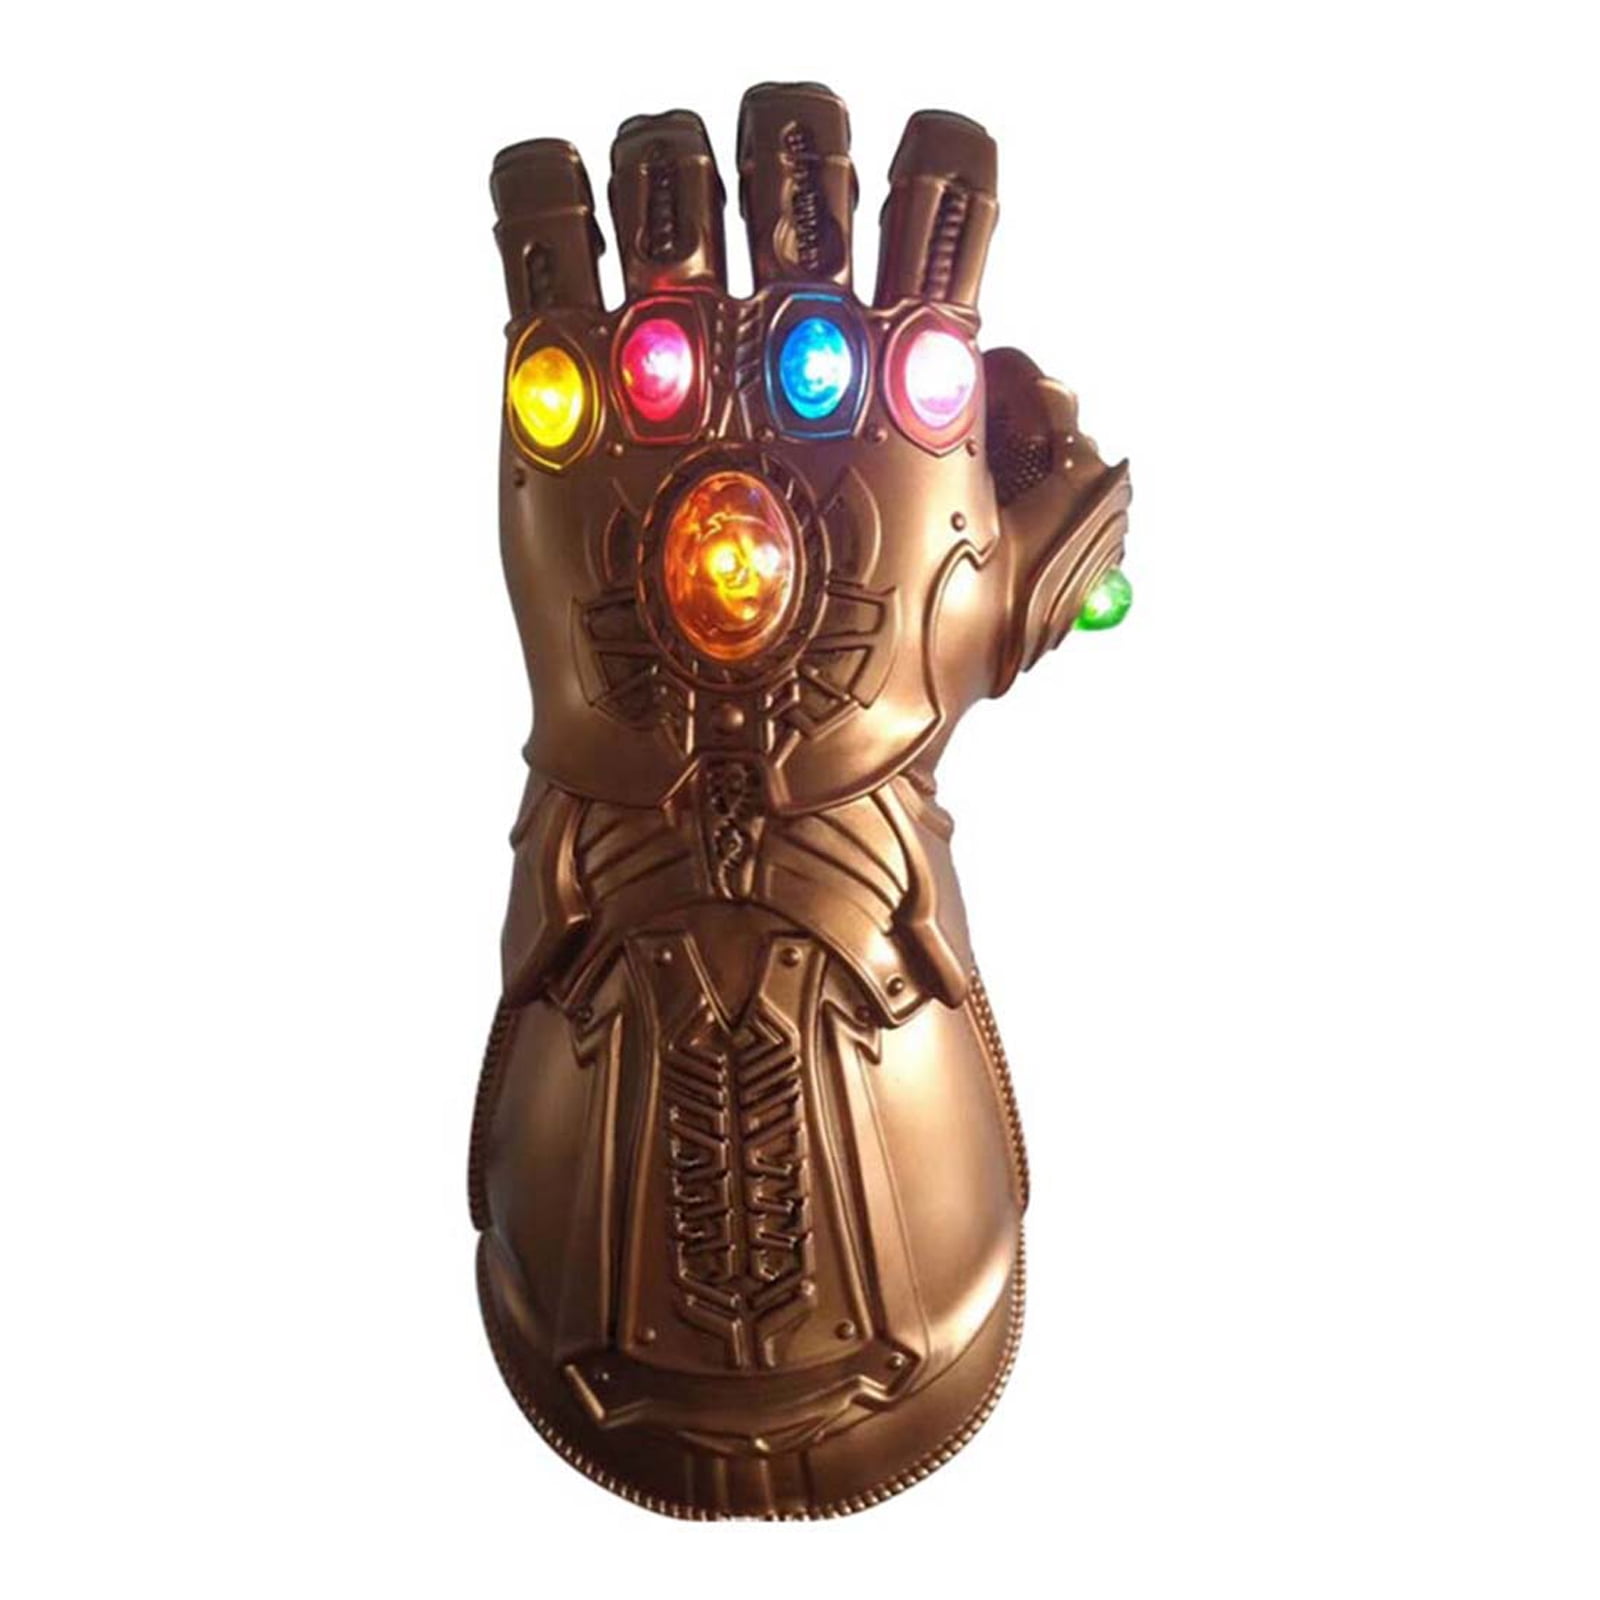 2019 NEW LED Light Thanos Infinity Gauntlet The Avengers Legends Glove Kid Adult 